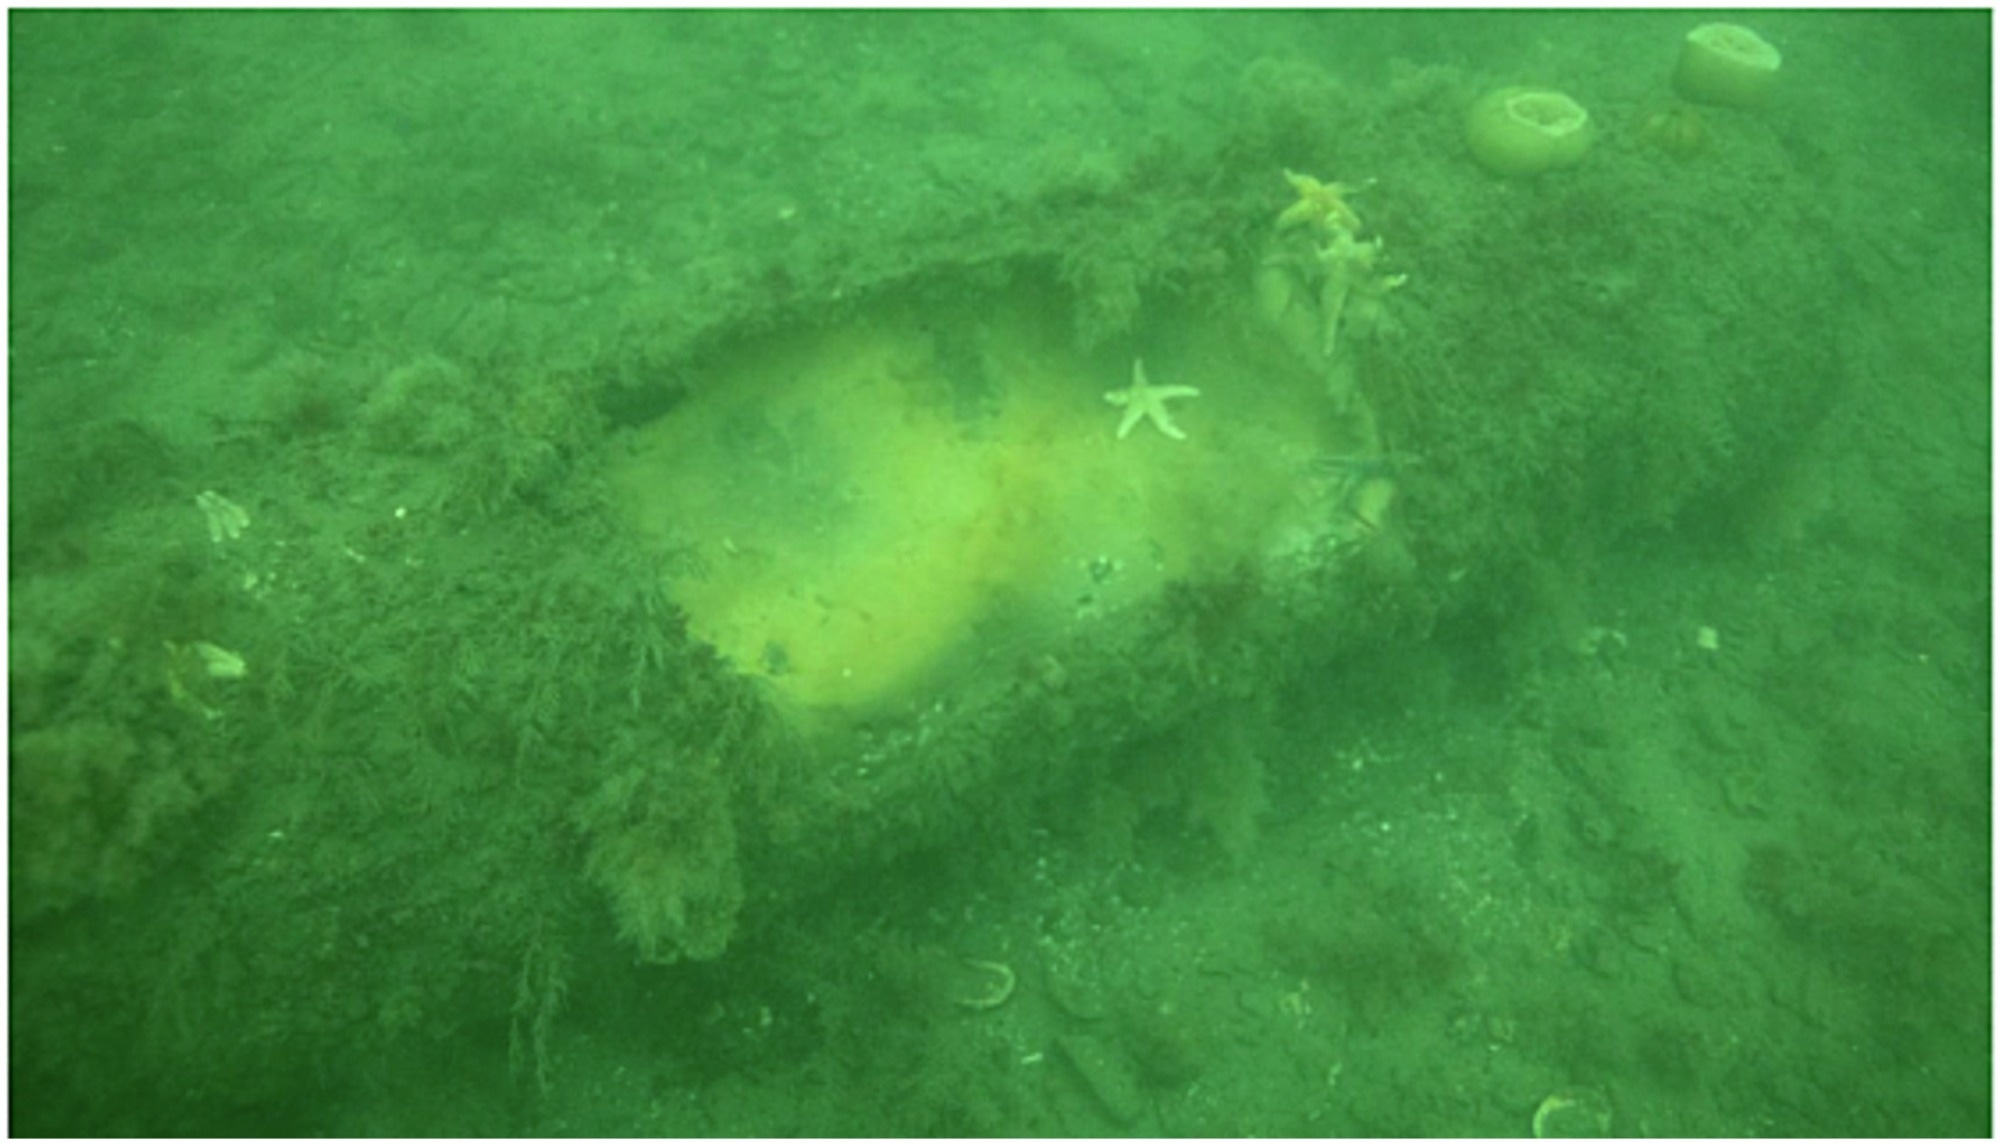 New NPL Research Into Unexploded Underwater Ordnance Removal Aims to Protect Vulnerable Marine Environments